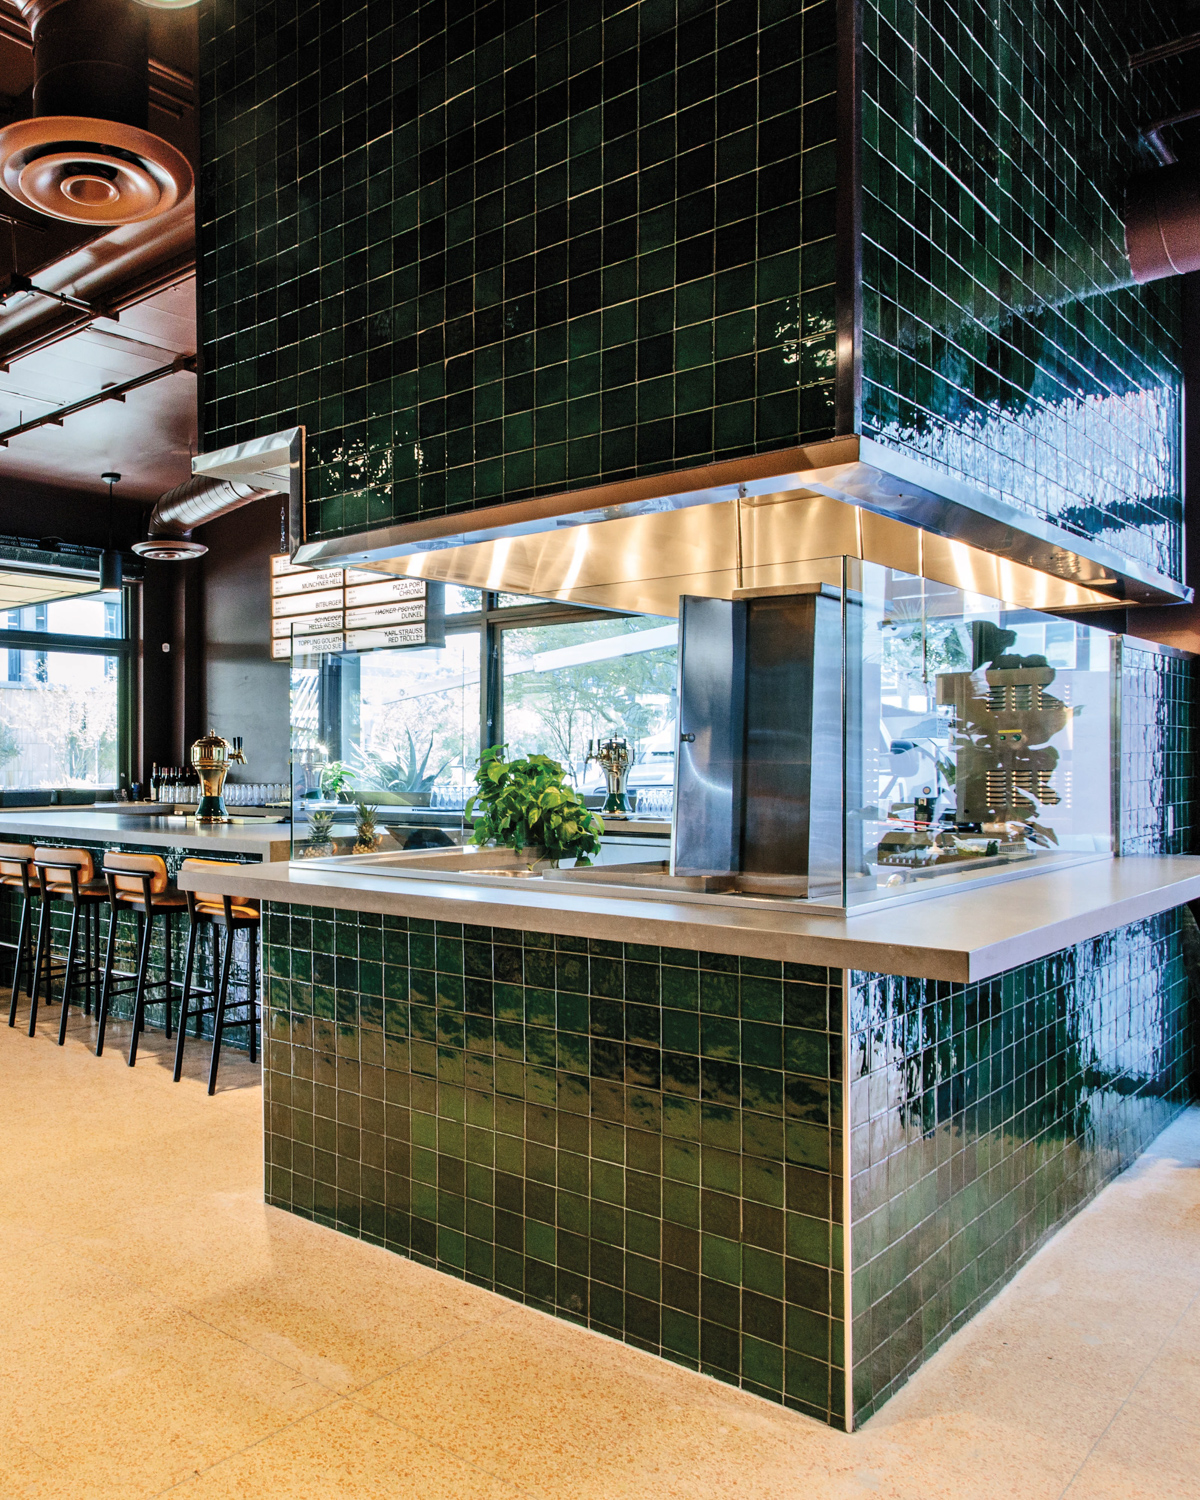 island kitchen with green tile, bright lights and lots of space